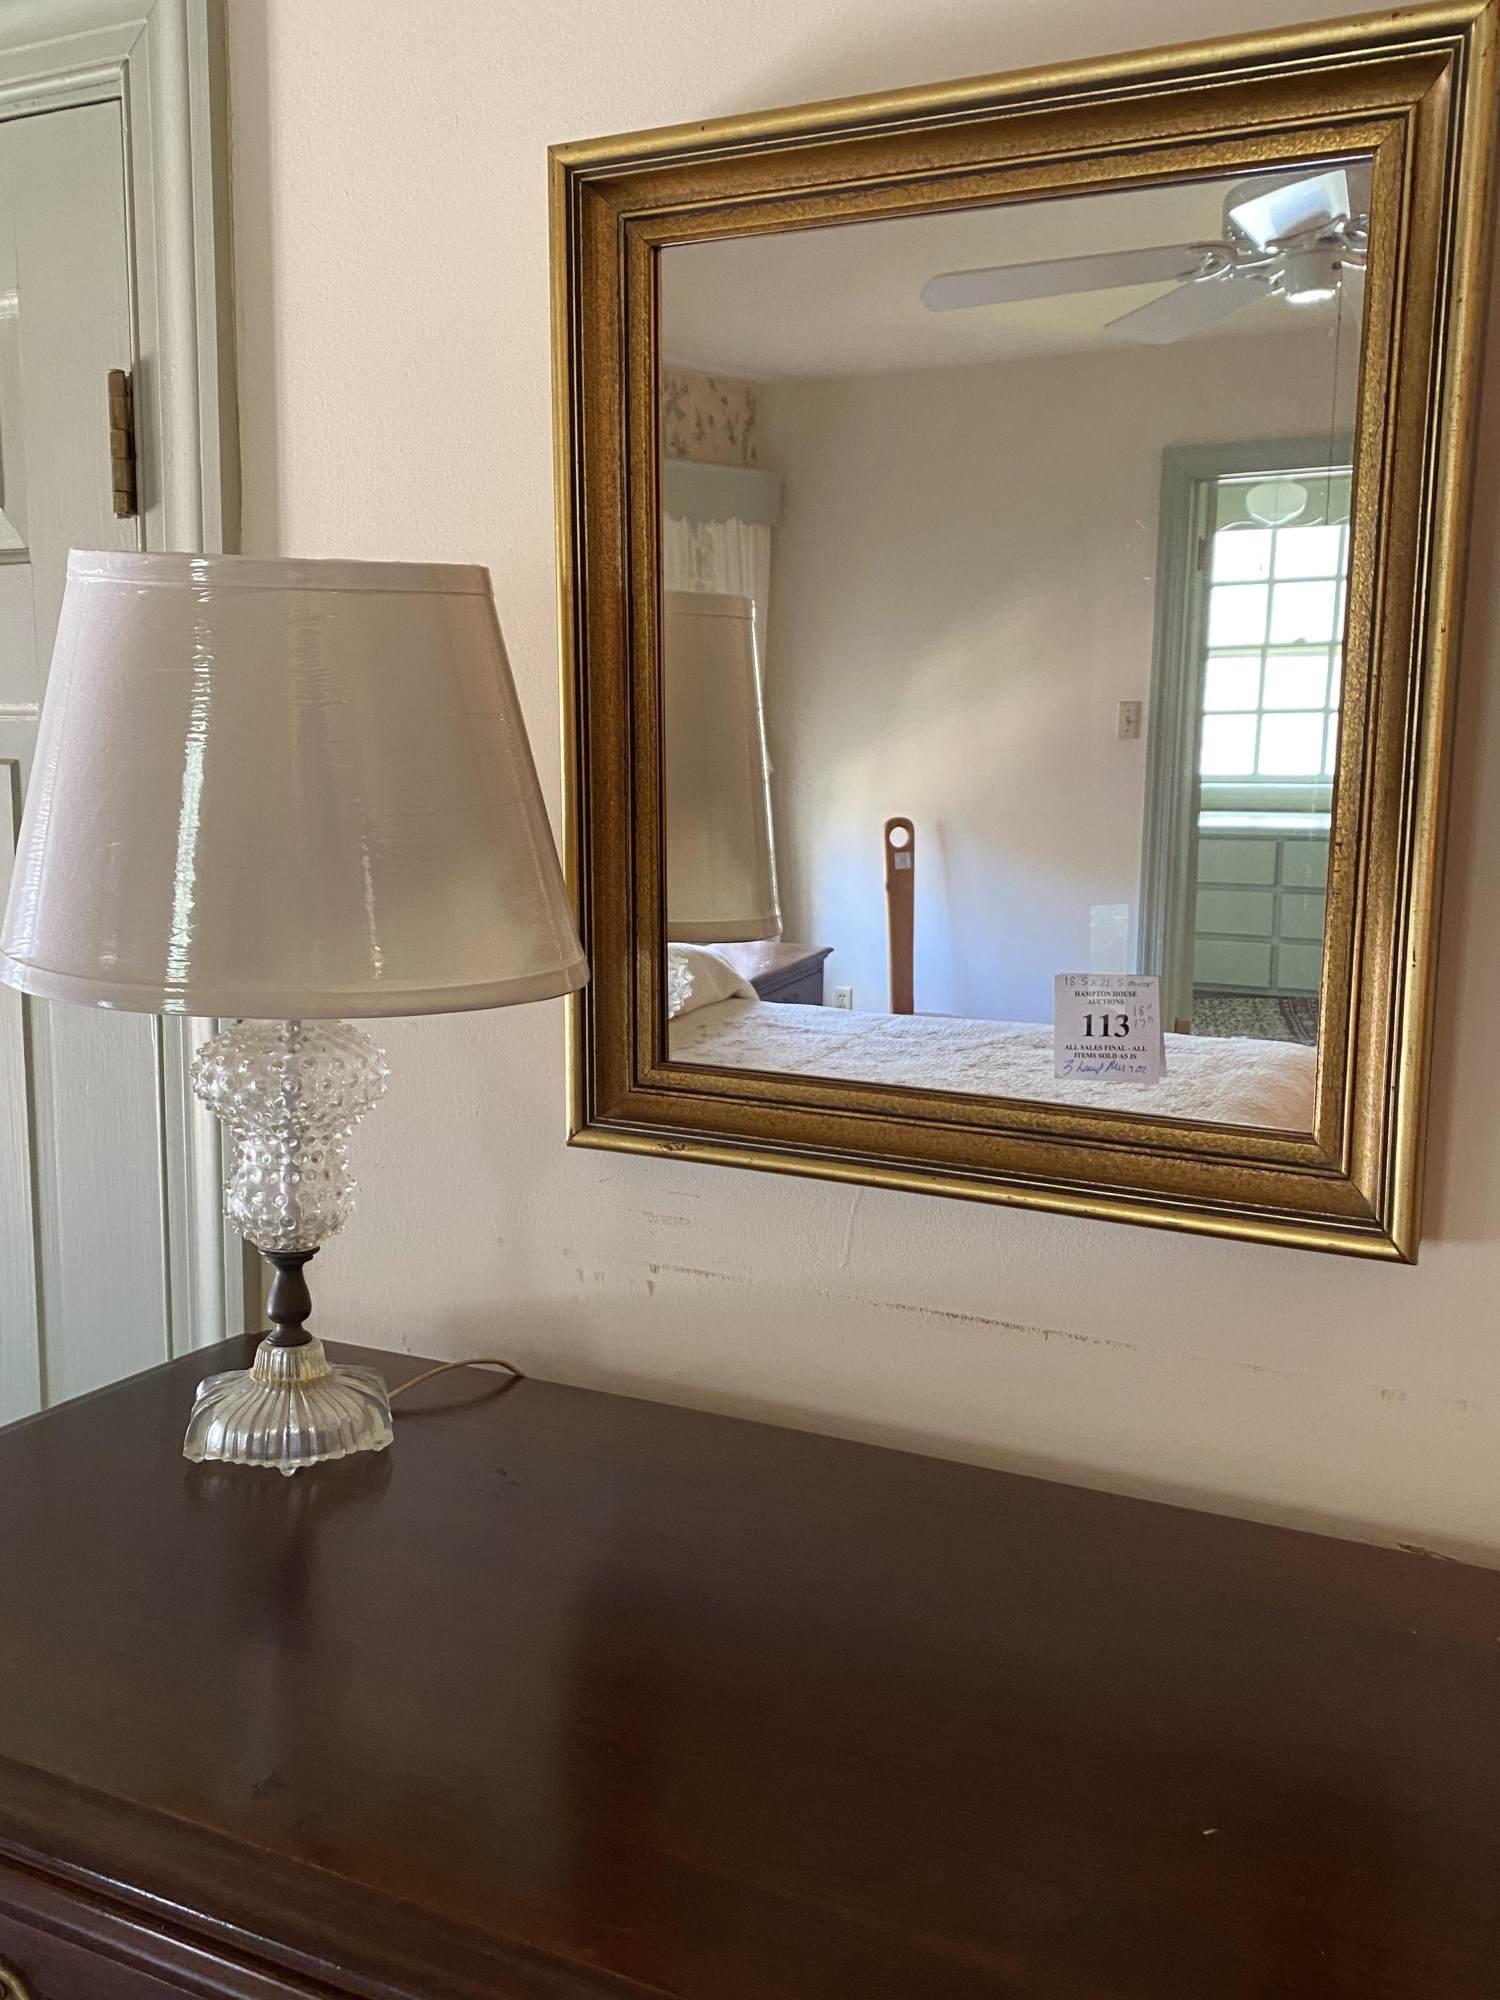 3 TABLE LAMPS AND A GOLD FRAMED MIRROR